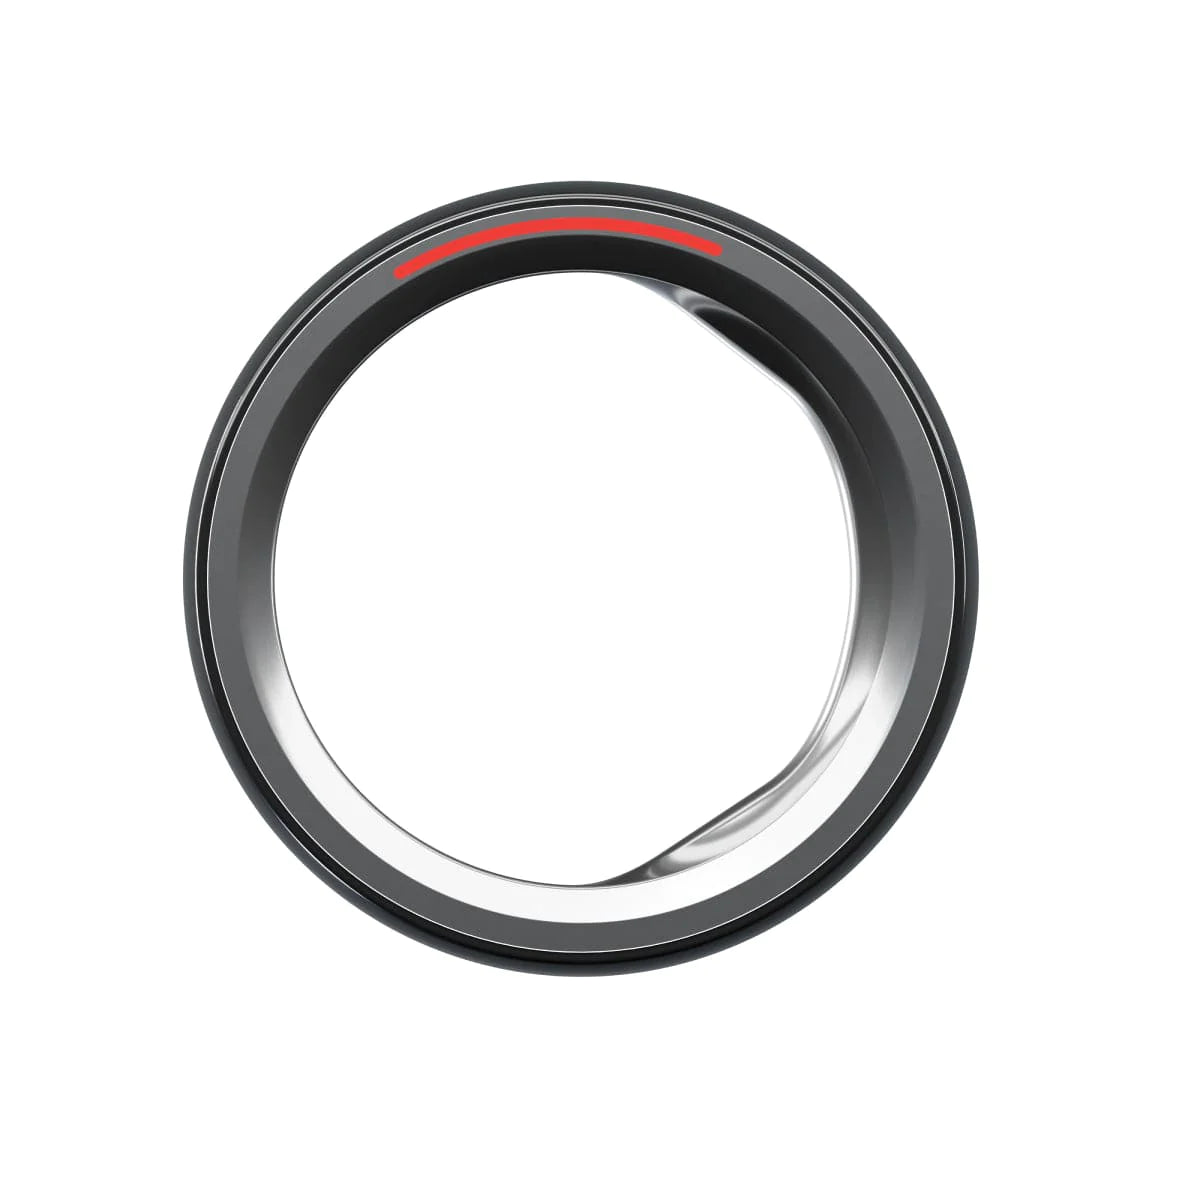 Halo Ring - Smart Ring for men and women's health, fitness, sleep and entertainment